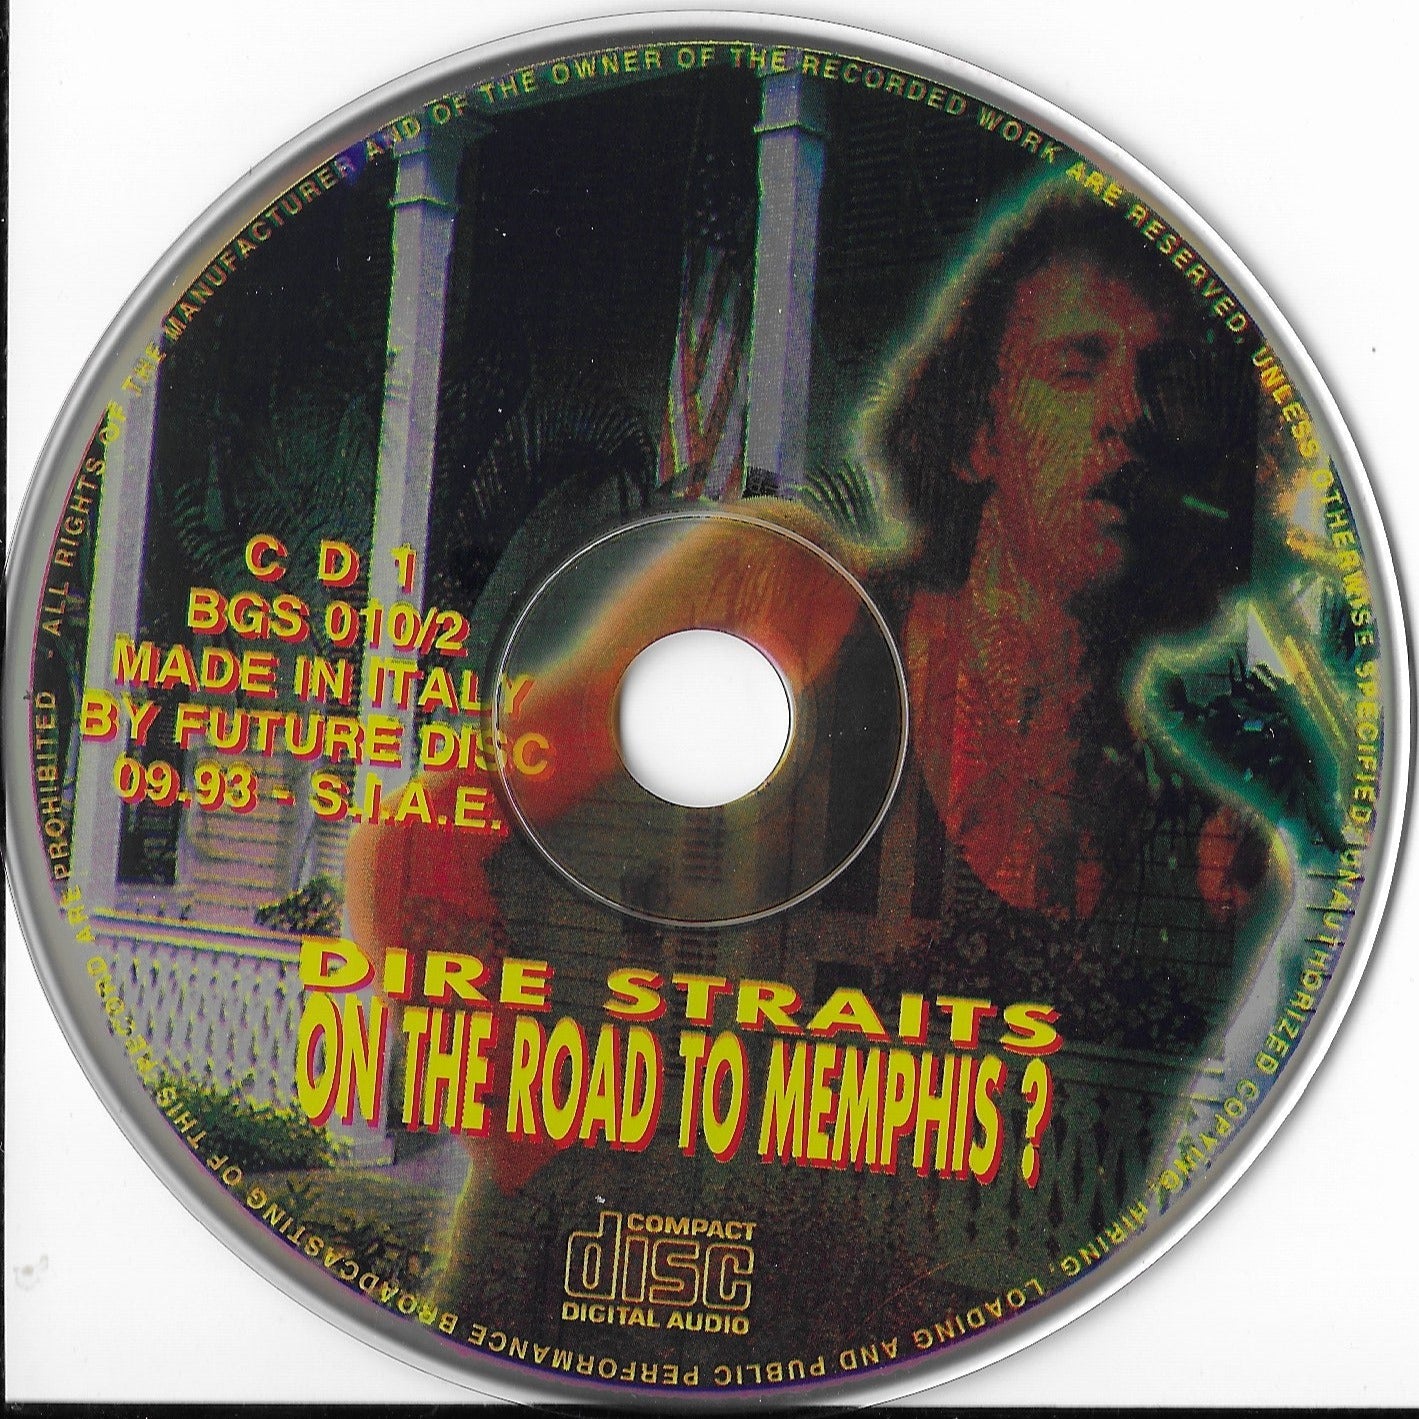 DIRE STRAITS - On The Road To Memphis ?